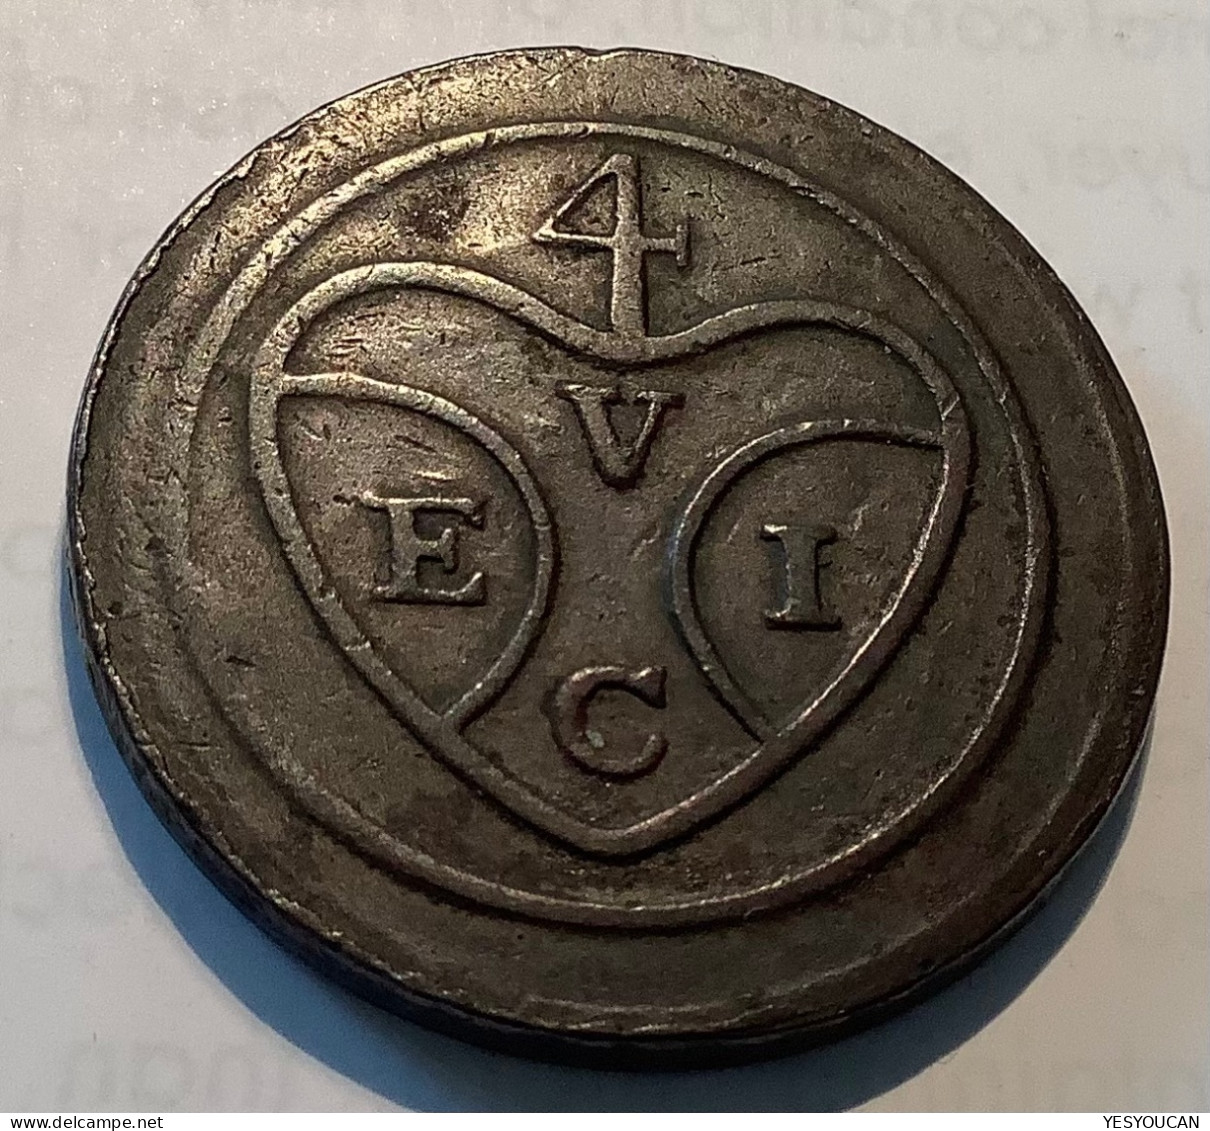 East India Company 19th C. Scarce Bronze Weight Or Token "4 / V E I C", Very Fine (Inde, Coin Monnaie - Inde